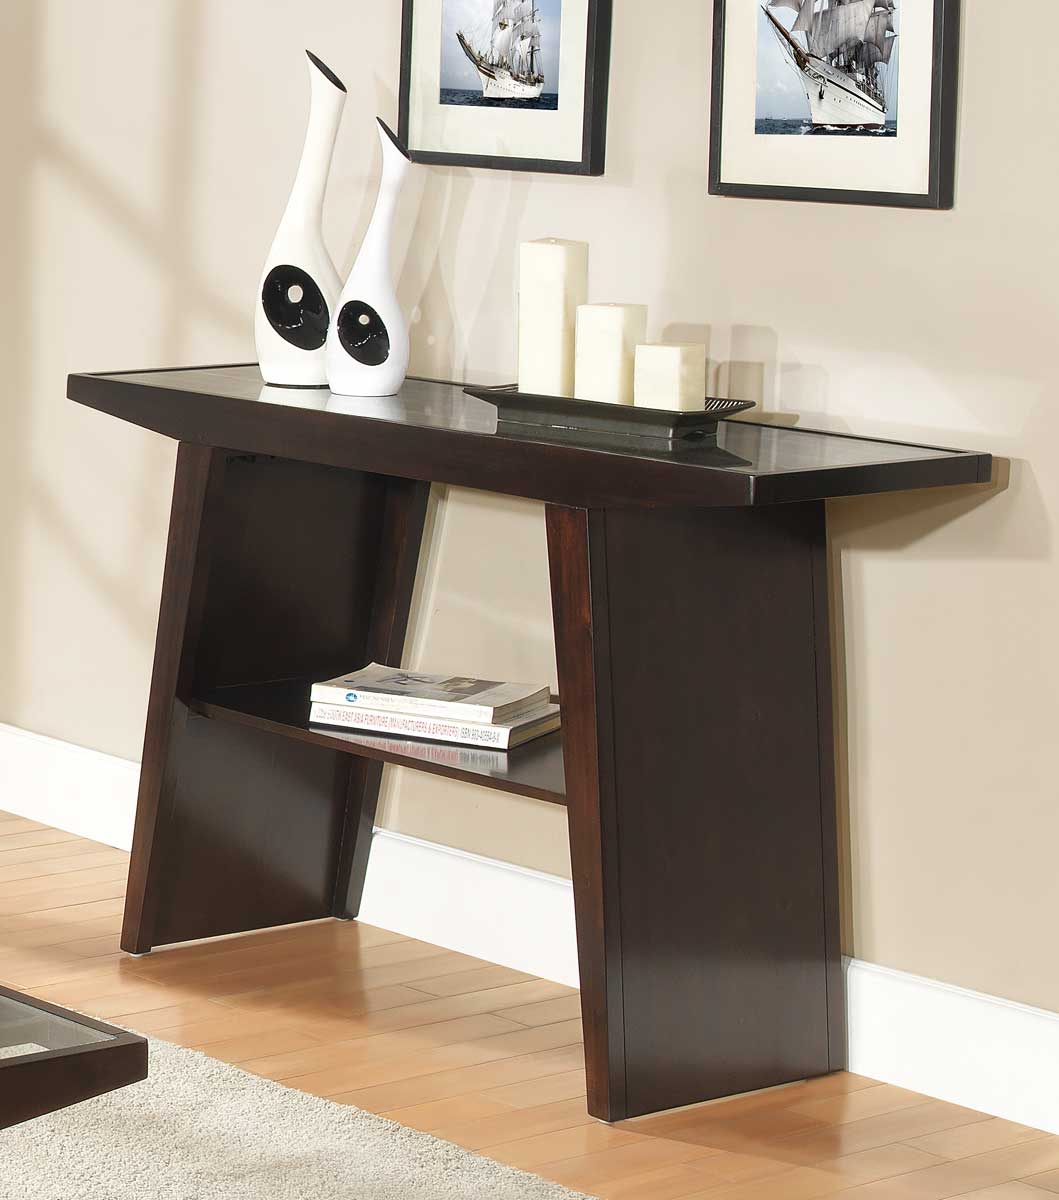 decor whit marble and brown table reflections espresso ideas console gloss modern behin tures wood looking decorating oak white ferndale nate small dark berkus good height round